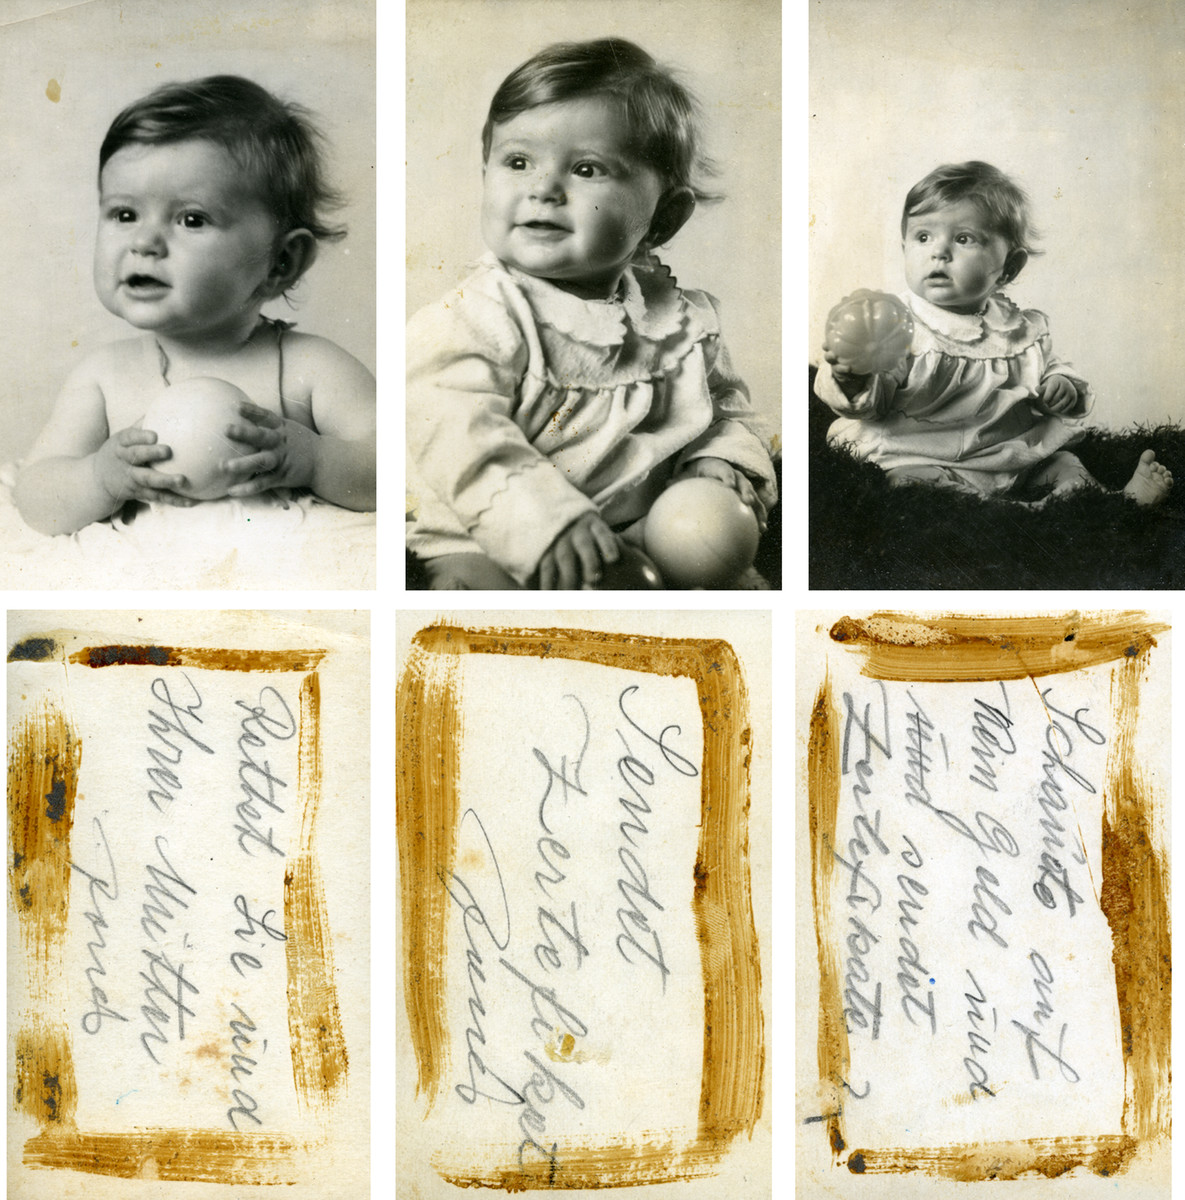 Studio portraits of baby Gerta Eckstein which were made to send to relatives in Palestine.

Underneath each picture is a note her father wrote begging someone to save her life by sending certificates.